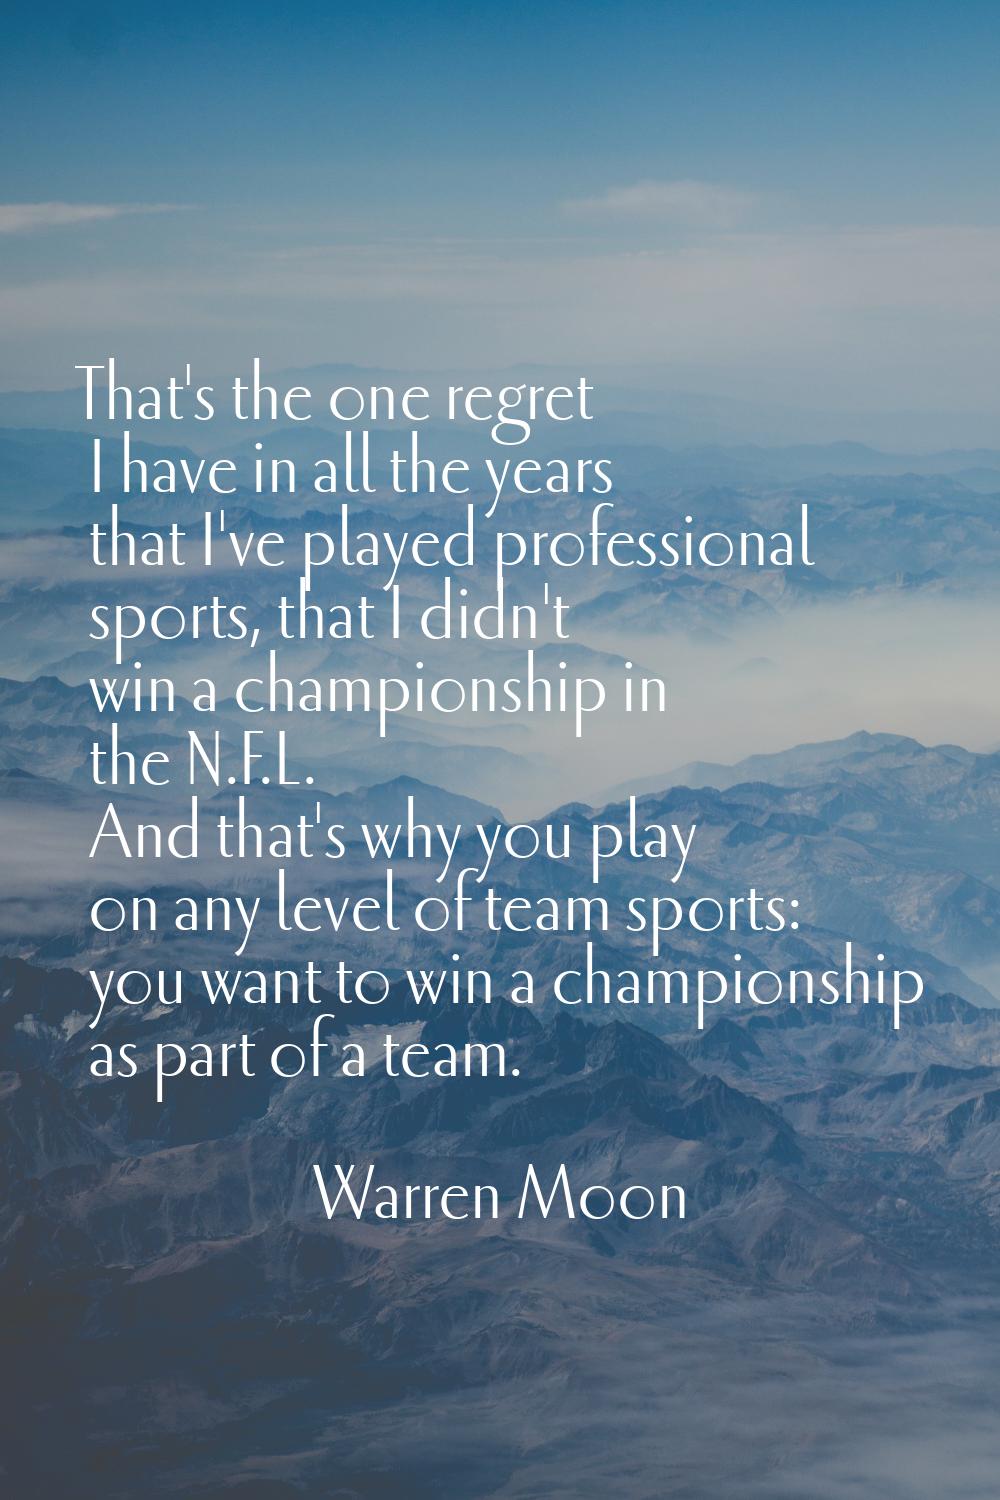 That's the one regret I have in all the years that I've played professional sports, that I didn't w